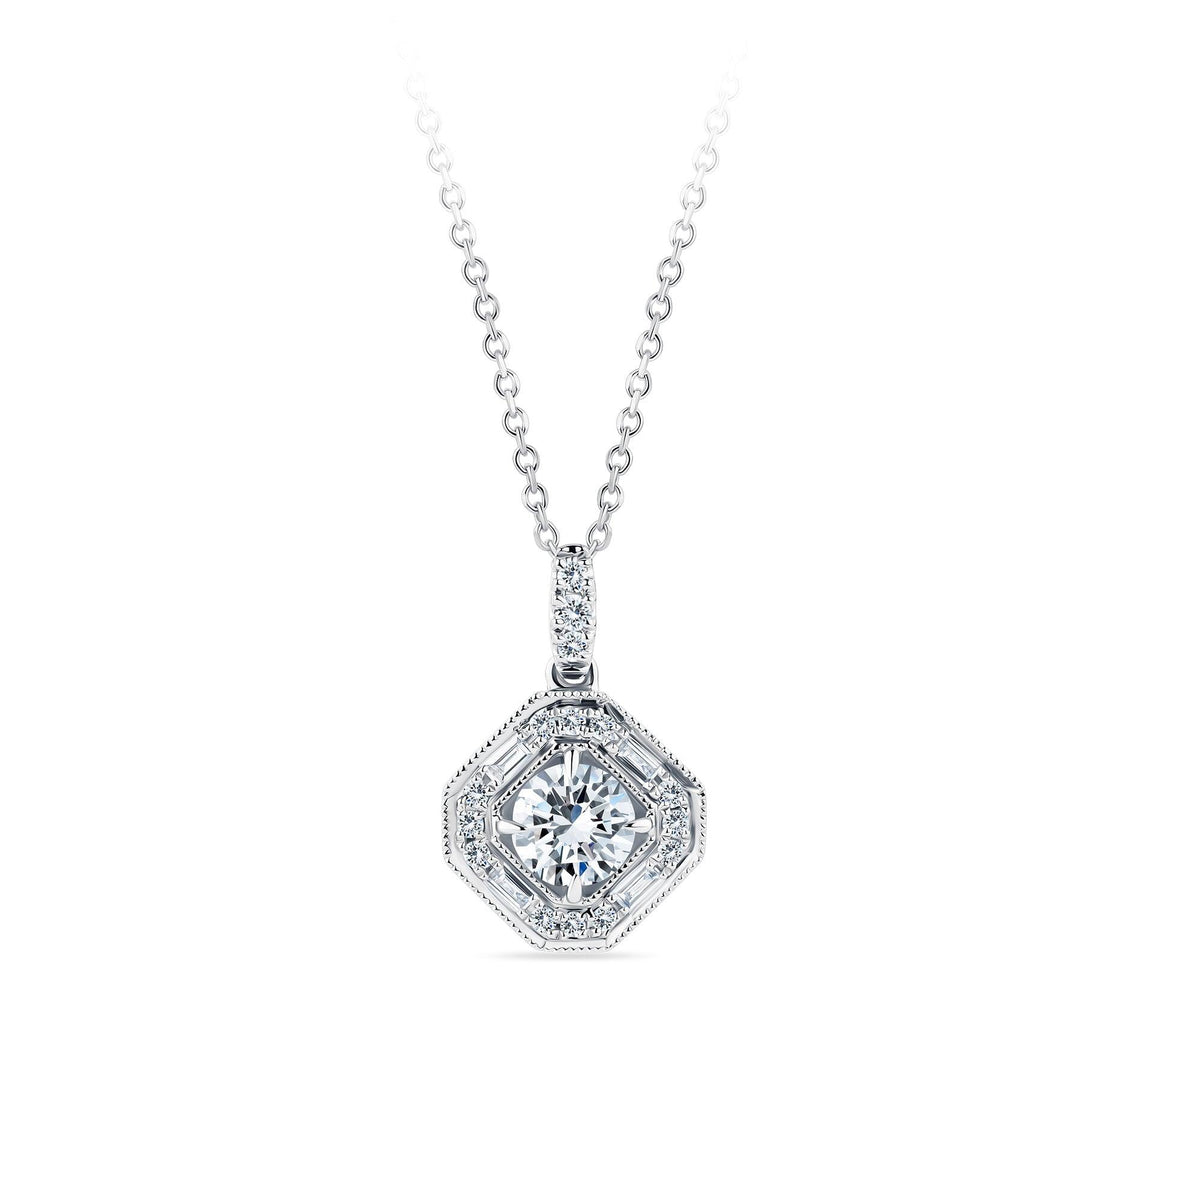 1917™ 0.52ct TW Diamond Vintage Halo Pendant in 18ct White Gold - Wallace Bishop